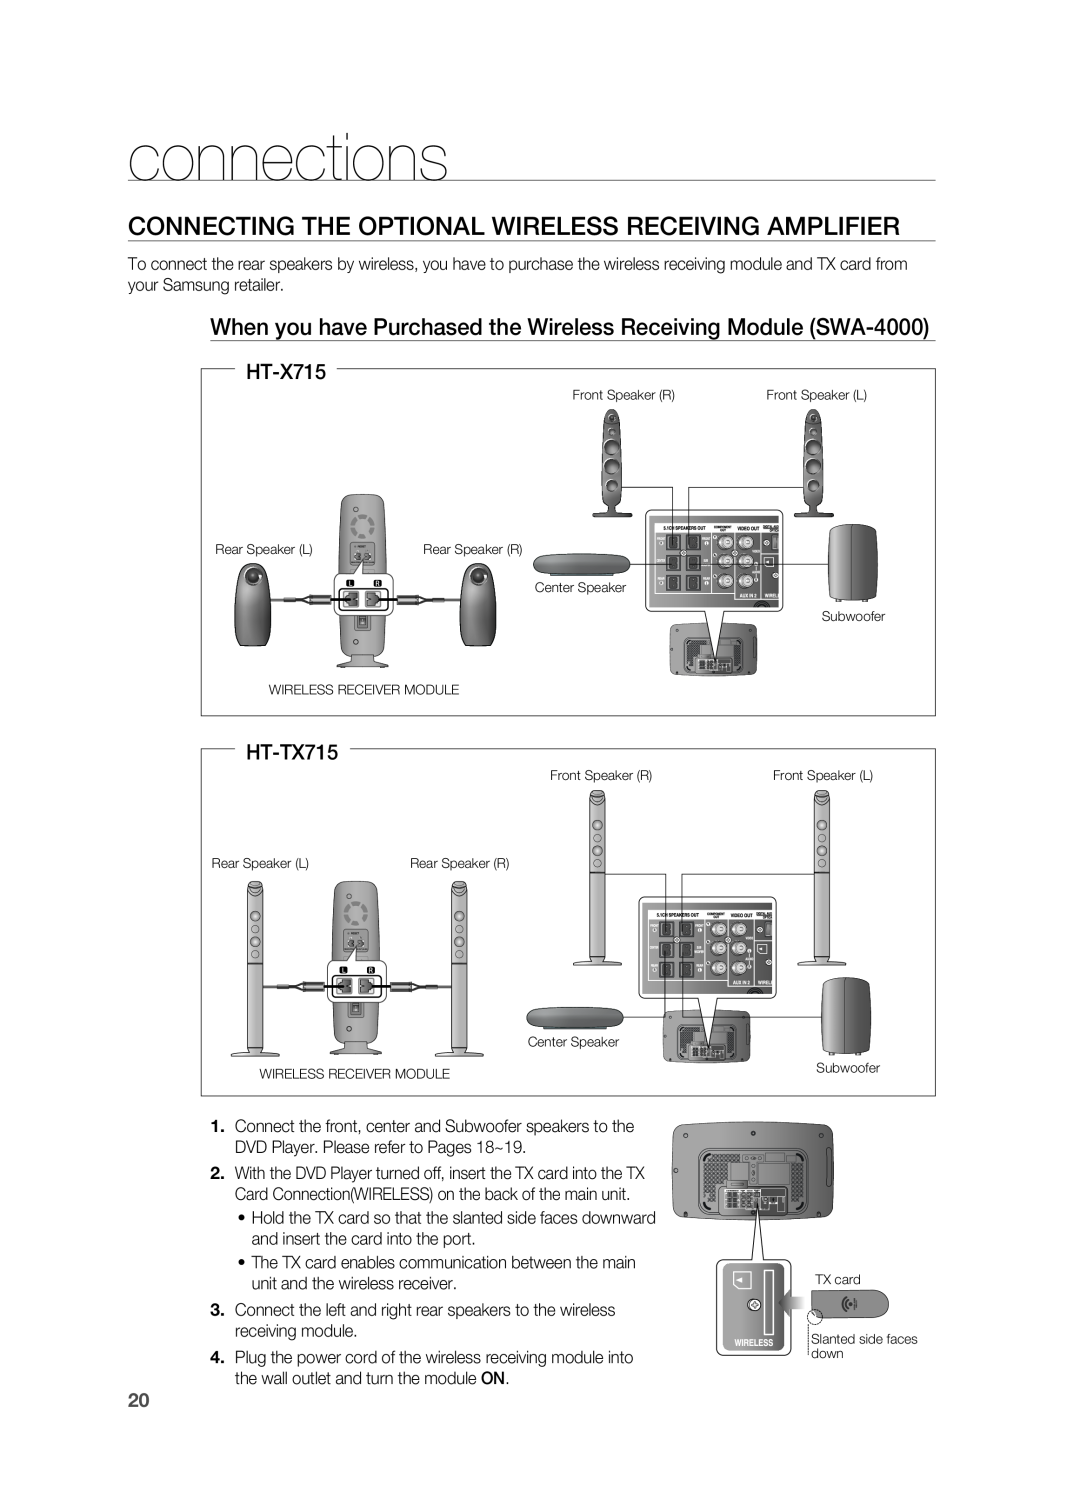 Samsung HT-TX715 user manual connections, HT-X715 